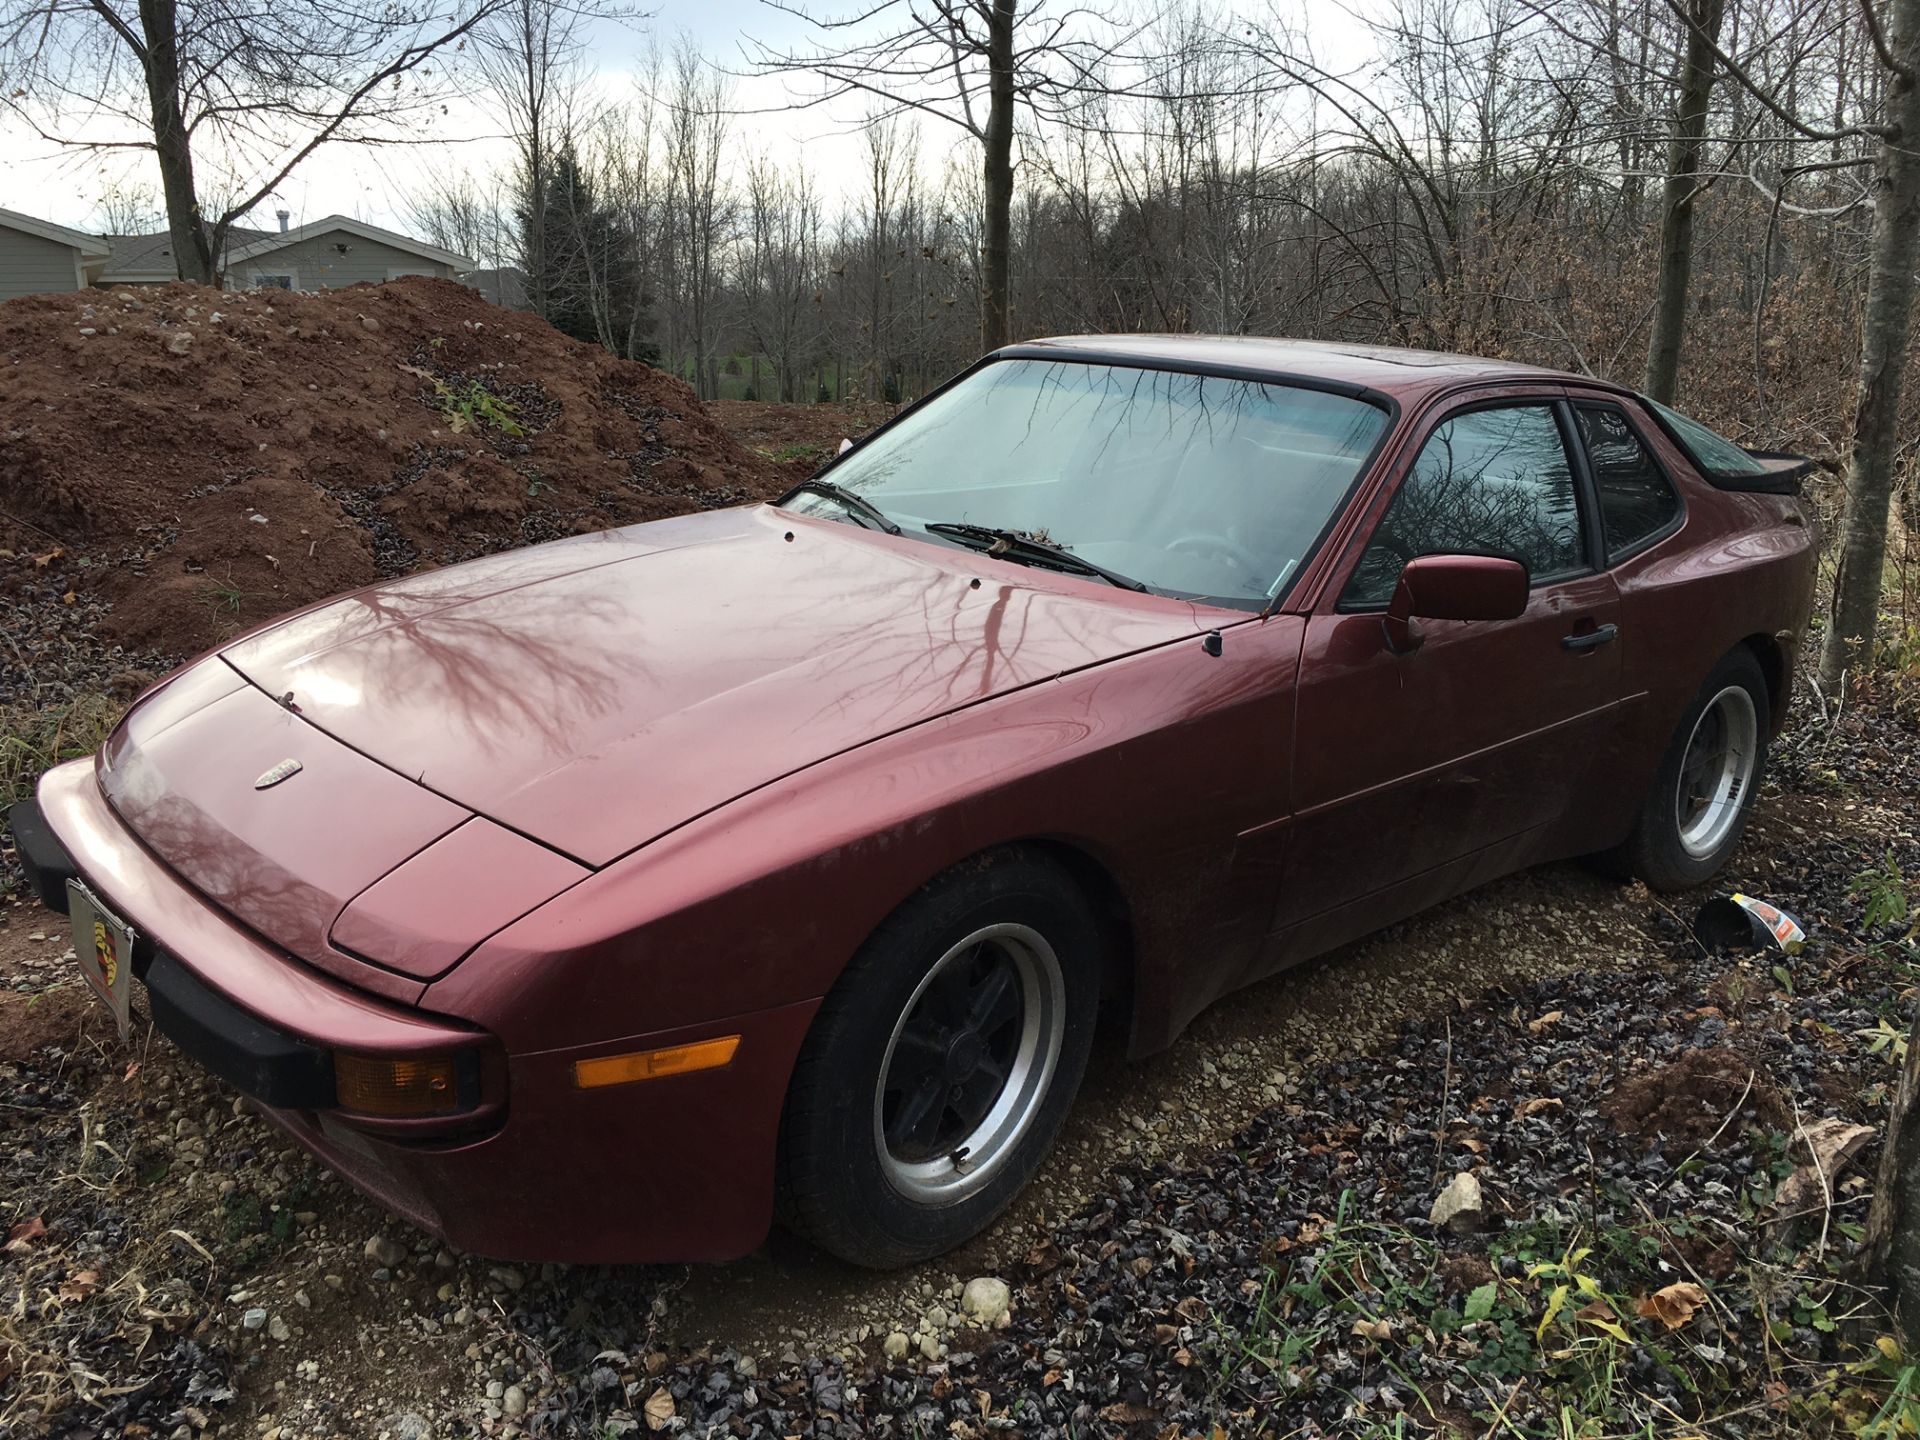 (1984) PORSCHE 944 VIN#: WP0AA0948EN461206; 5 SPEED MANUAL TRANSMISSION, RUNNING CONDITION - Image 3 of 12